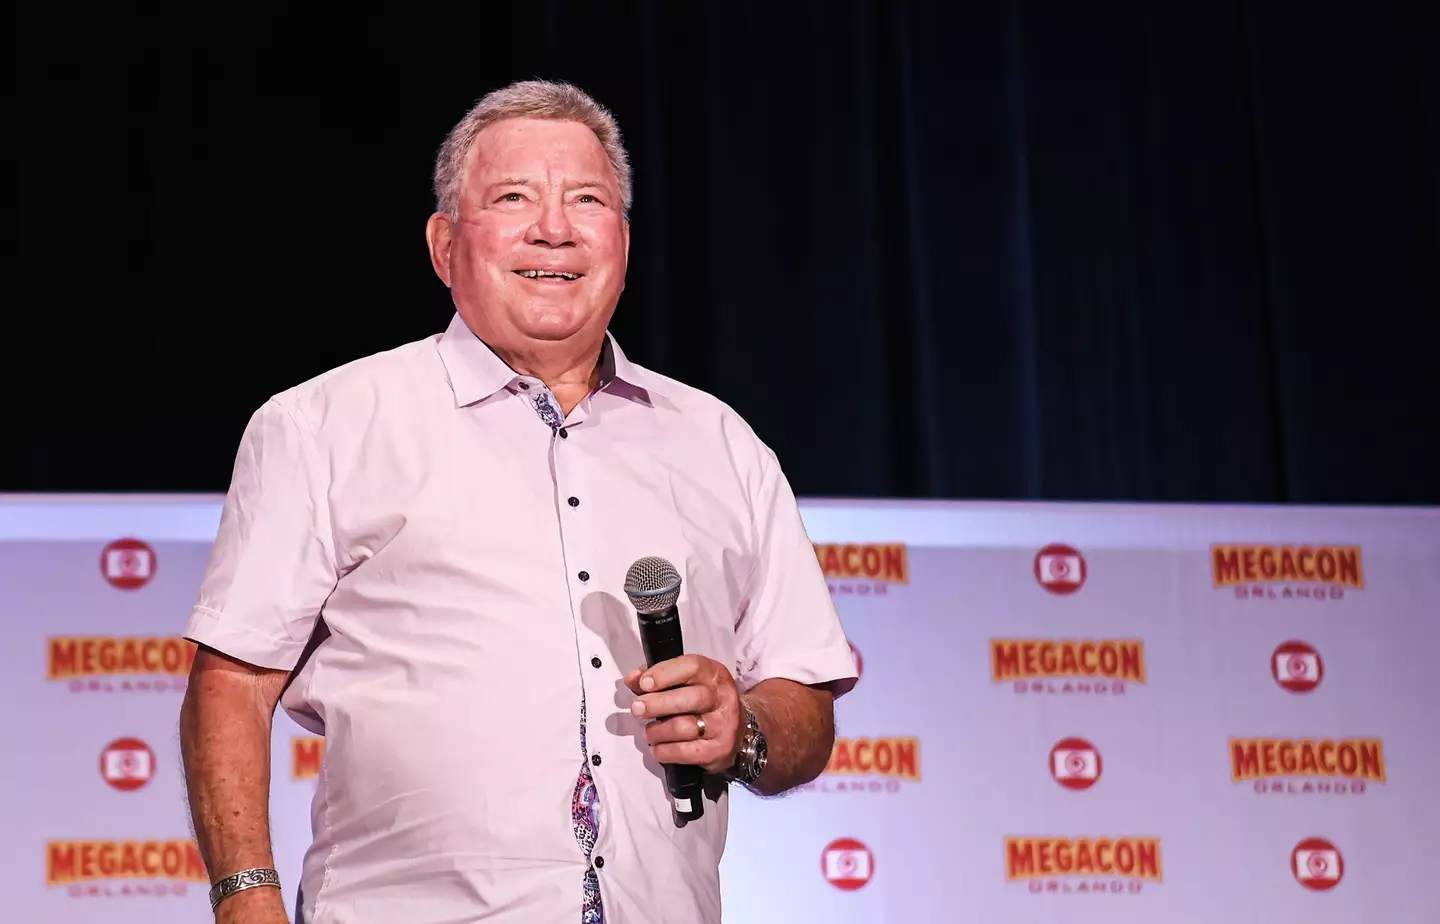 Shatner's told fans he had a 'technical difficulty' after he s**t his pants.